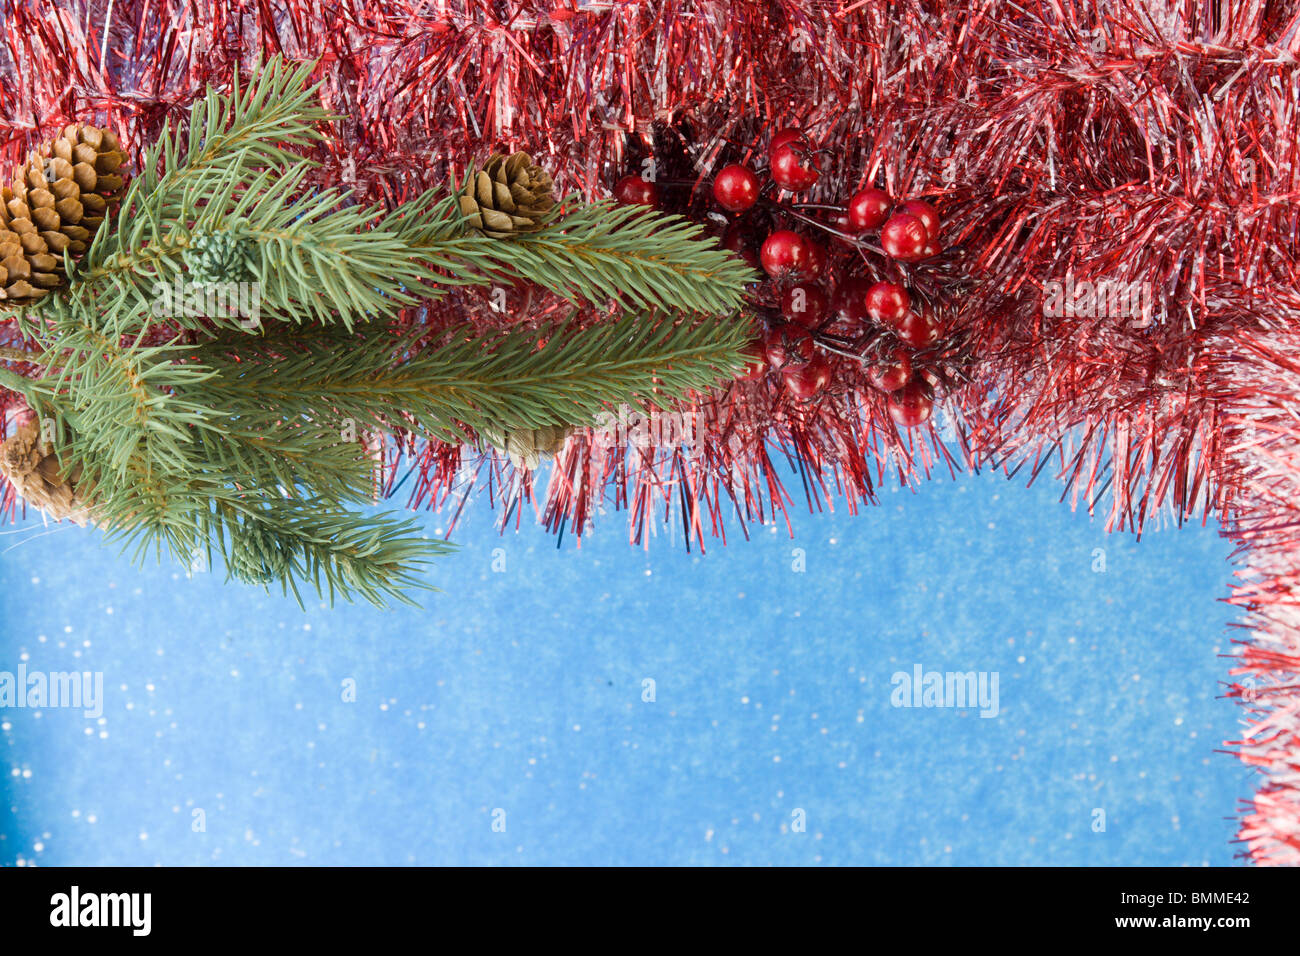 red and white Christmas tinsel garland corner frame with fir branch, holly berries and copyspace Stock Photo